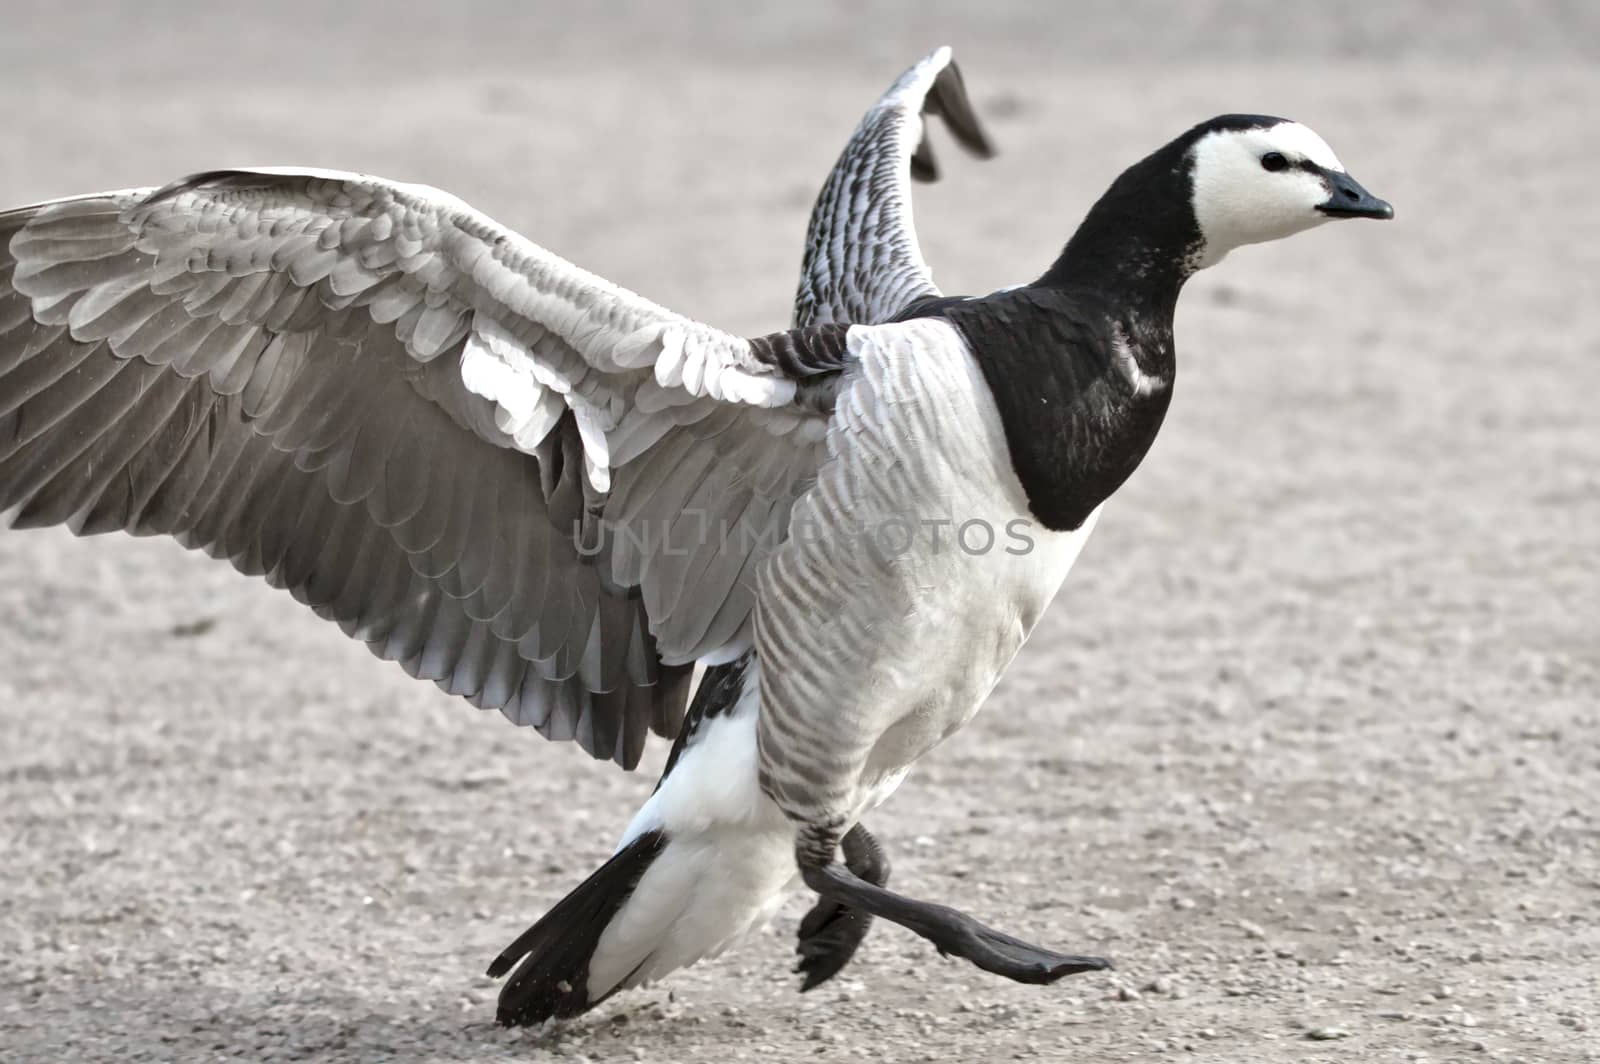 Dancing canadian goose with wings spread and feet in the air.